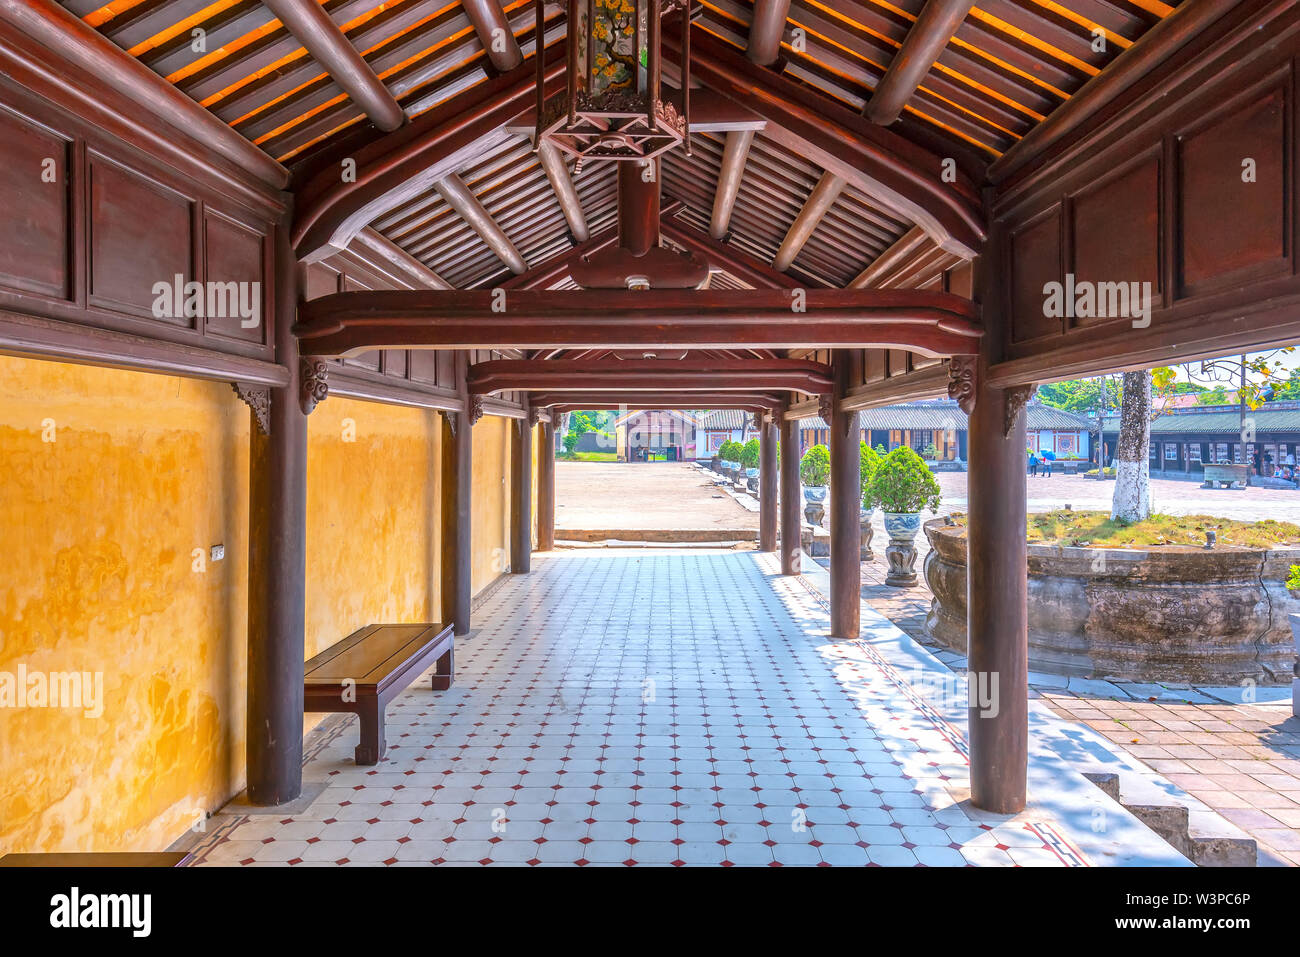 Amazing wooden hallway in the imperial Forbidden Citadel. The place that leads to the palaces of kings, feudal officials in the 19th century in Hue, V Stock Photo